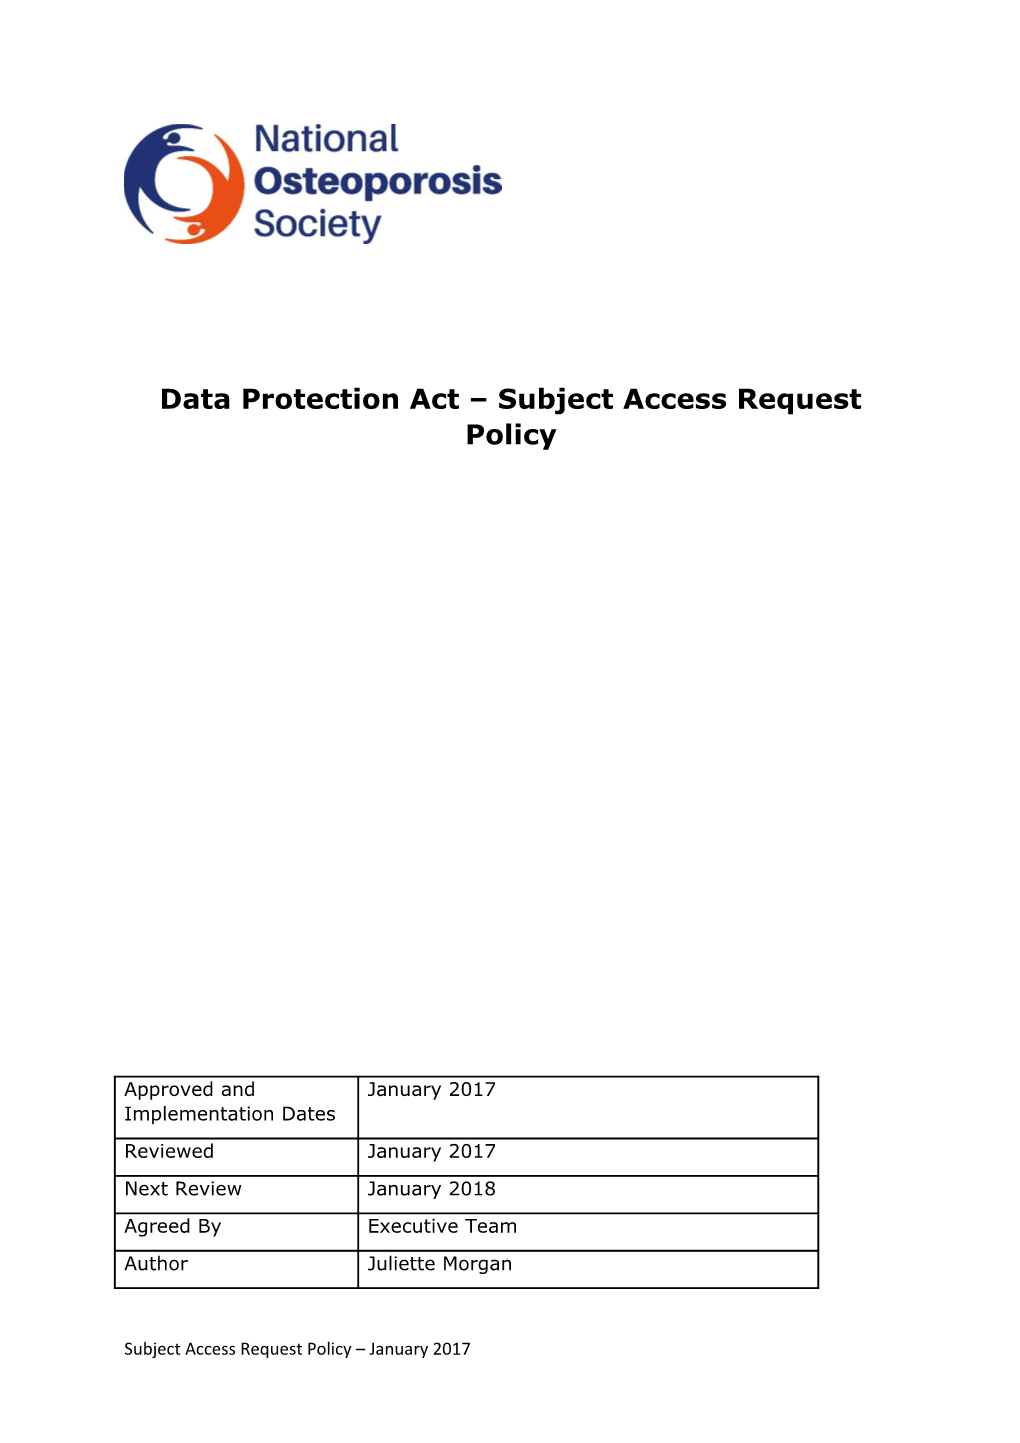 Data Protection Act Subject Access Request Policy